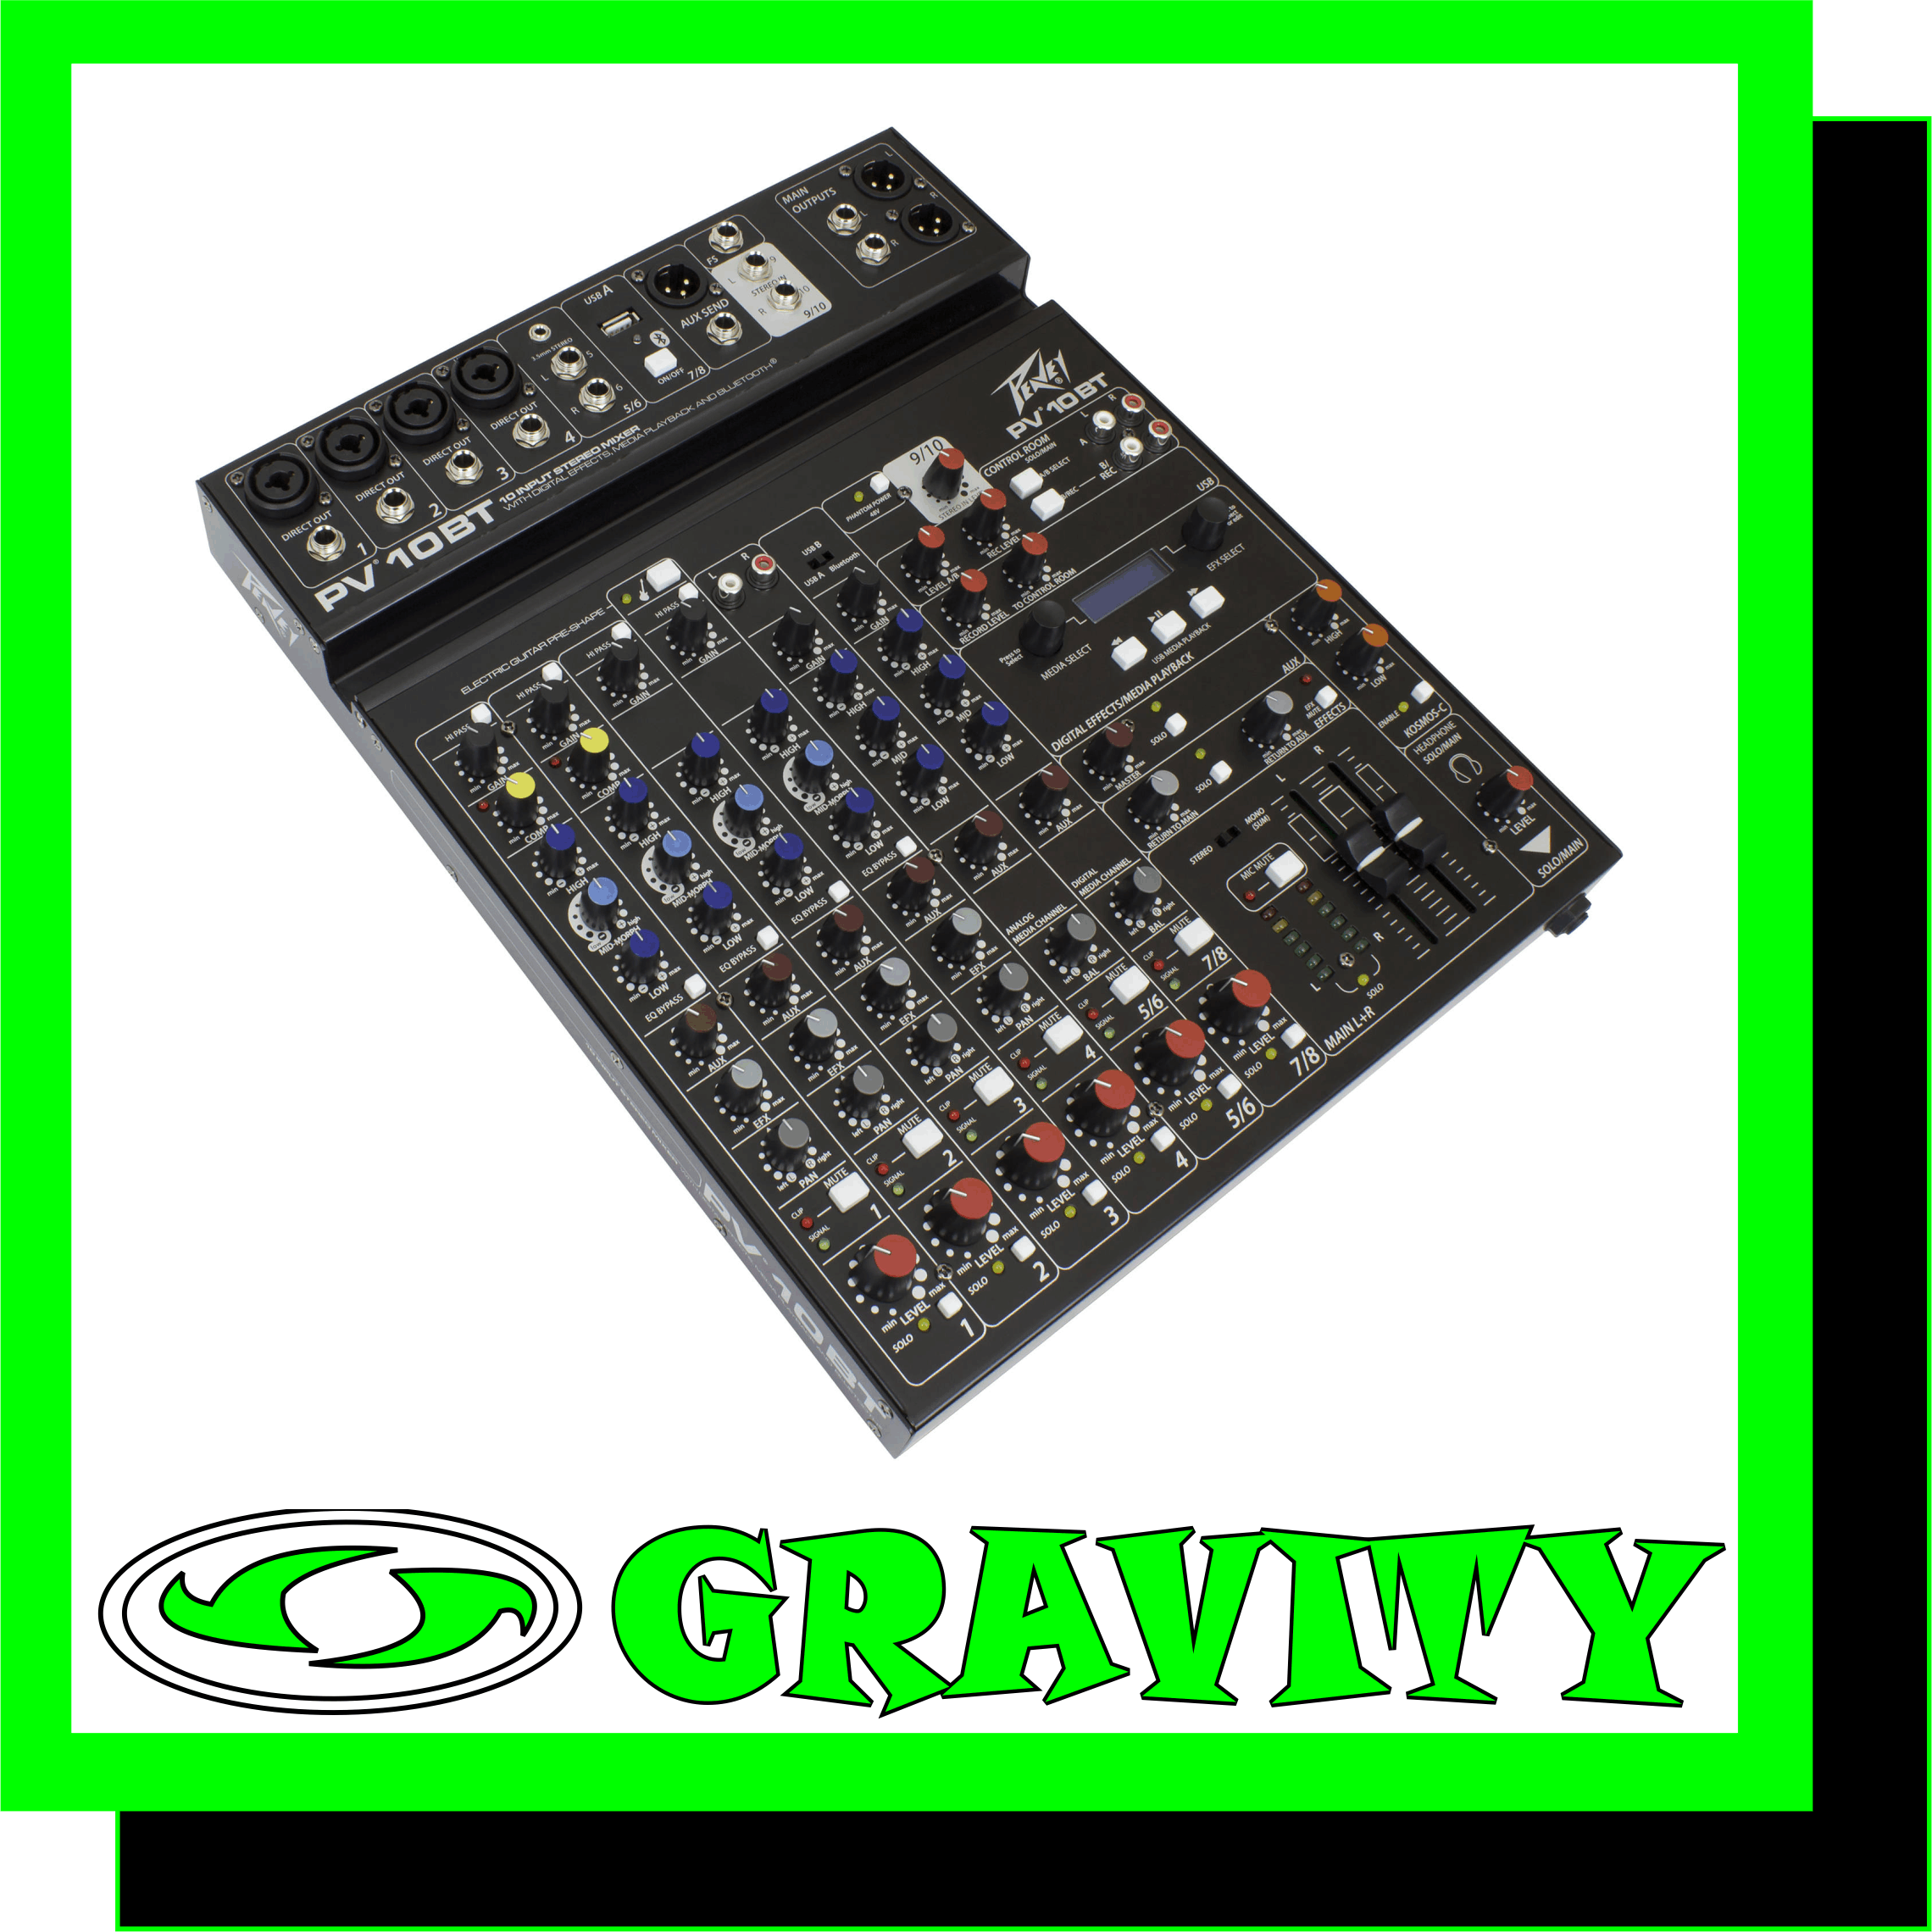 PV® 10 BT  Features: -New rugged, slim, low-profile console design -Convenient tablet cradle -4 combination XLR/1/4" low noise mic preamps -Selectable Hi Pass Filter on first 4 inputs -3-band EQ on all channels -4 channels of Peavey's exclusive MidMorph® EQ -EQ bypass per channel -2 channels of built-in compression -Individual channel mutes -Individual Listen/Solo function -LED clip and signal present indication -4 Channels of direct out -Stereo pan control per channel -Channel 5/6 stereo 1/4", RCA, or 3.5mm input channel -Dual selectable control room outputs -One pre-fader AUX send -KOSMOS® bass and treble enhancement -Main stereo outputs with 1/4" unbalanced and balanced XLR connectors -Precision 60 mm faders on master -High quality master LED meter bridge -Master mic mute -Studio quality headphone output -Equipped with Bluetooth wireless connectivity, Bluetooth 3.0 + EDR, A2DP -On-board USB-A MP3 and WAV playback -Stereo USB-B streaming audio in and out, 16-bit, up to 48kHz sample rates -Built-in Digital Effects with LCD Display -Peavey's exclusive on-board Hi Z guitar input -Global 48V phantom power -Product Dimensions: 12.75" wide x 15.1" deep x 2.1875" high (32.39 cm x 38.35 cm x 5.56 cm) -Weight Packed: 9.48 lb(4.3 kg) -Width Packed: 16.14"(40.9956 cm) -Height Packed: 16.54"(42.0116 cm) -Depth Packed: 3.54"(8.9916 cm)  Overview: Introducing the next level in world-class non-powered mixer performance. The all new PV® series mixing consoles include Peavey's reference-quality mic preamps that spec in at an incredible 0.0007% THD, making the PV series mixers excellent for live or recording applications.  The PV 10 BT includes 4 channels of reference quality mic preamps, 4 direct outputs for recording, a stereo channel, media channel with Bluetooth® wireless input, high quality digital effects with LCD display, streaming USB out, MP3 playback via USB A input, Peavey's exclusive Kosmos® audio enhancement, 48-volt phantom power, dual selectable control room outputs, 2 channels of compression, one channel of on board selectable guitar preamp, 3-band EQ per channel with bypass, channel mute buttons, aux send, signal clip indicators, and a stereo master LED meter bridge. This amazingly versatile mixer is at home both in the studio as well as live applications.  Modern features such as Bluetooth allow seamless connection to almost any "smart" device. 4 direct outs allow easy connection to most DAW interfaces for recording. In addition, the PV 10 BT can stream audio directly to a PC. MP3 playback is also available, just plug a flash drive with MP3 files on it into the USB A port and use the LCD to select and play back music. The PV series Solo feature allows the user to listen to individual channels via headphone or control room outputs, and the EQ bypass allows the user to hear and compare the EQ'd signal to the original signal with the push of a button. 2 channels of compression keep signals with difficult levels under control, and Peavey's exclusive guitar shape adjusts the EQ and preamp specifically for guitar. Hi pass filters on every channel remove unwanted rumble and noise, and balanced AUX and Master outputs ensure a clean noise-free signal to your powered speakers or power amplifier.